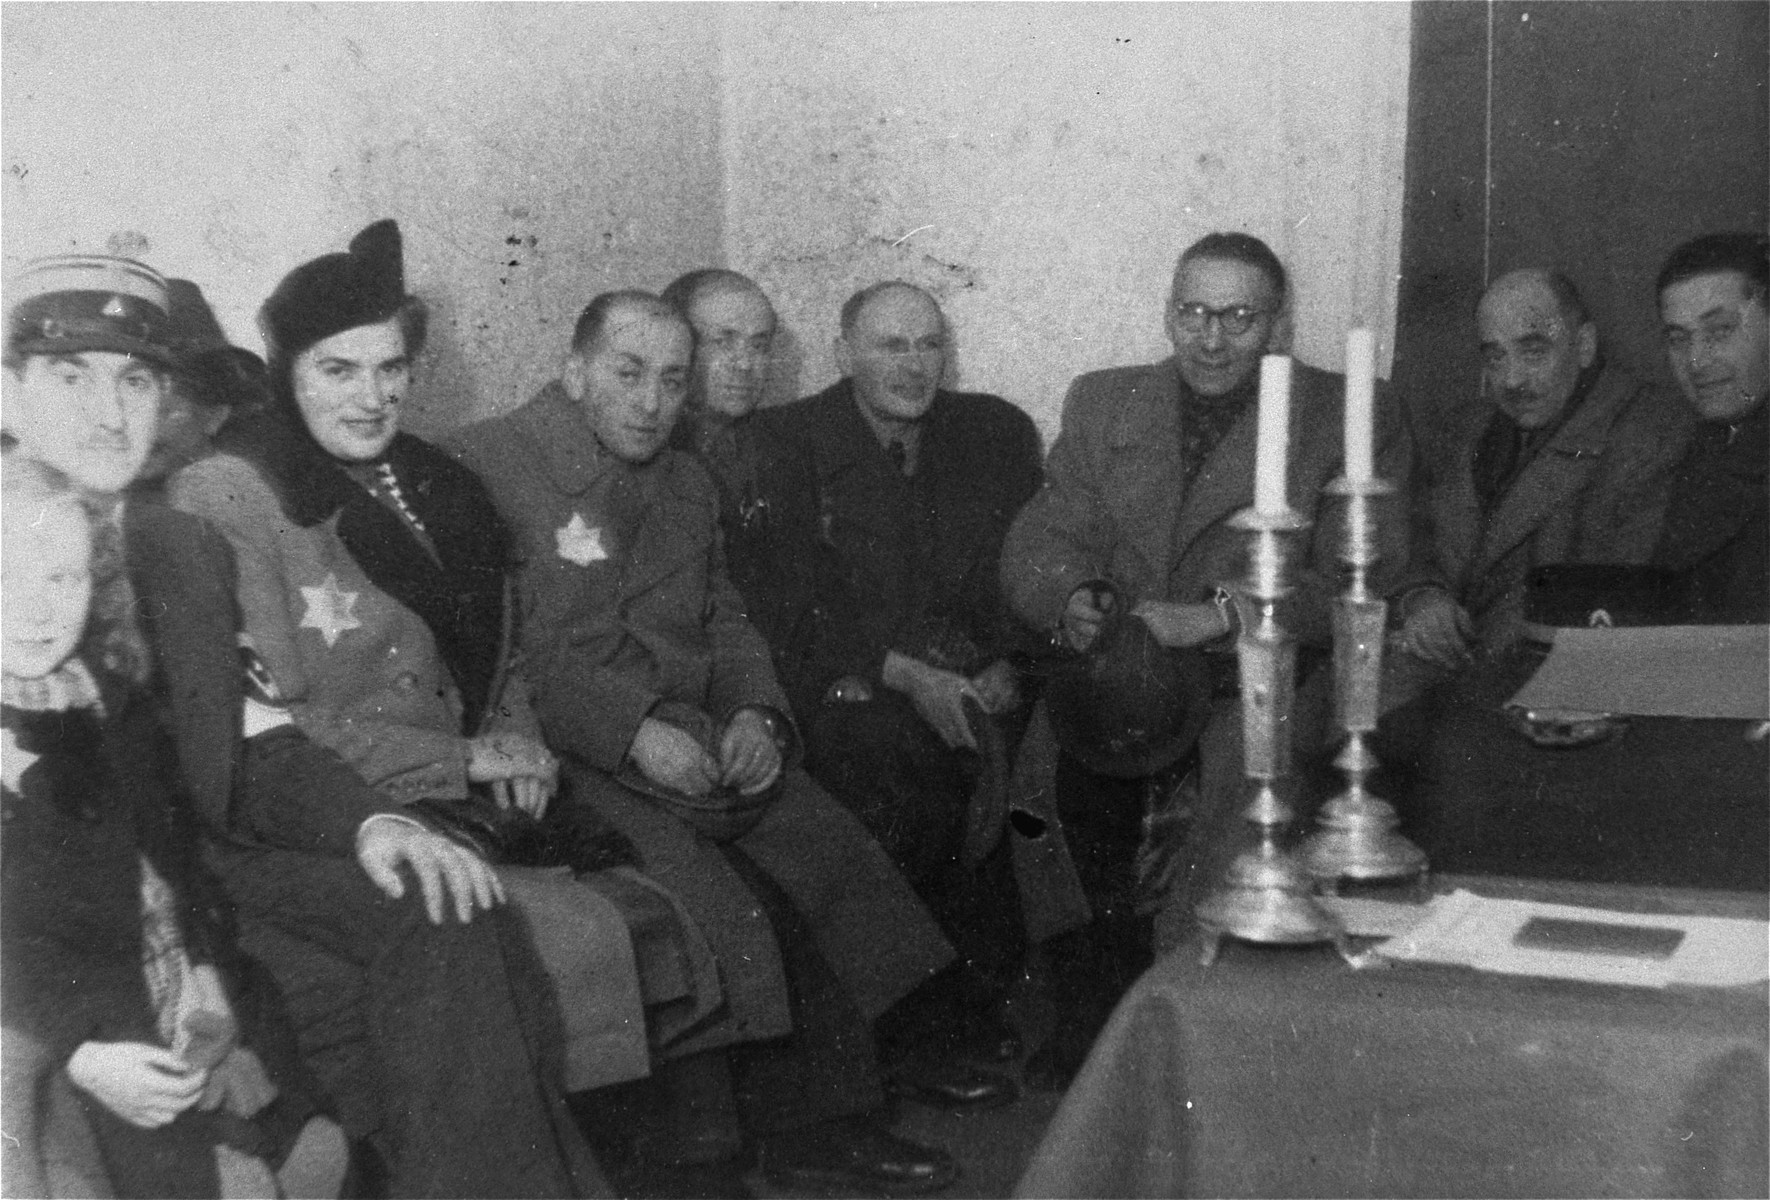 Social gathering in the Marysin police station in the Lodz ghetto.  

Among those pictured are Zeligman (first on the left) and Leon Rozenblat (second from the right).  Baruch Braszker is fourth from the left and [Uberbaum is on the far right.]